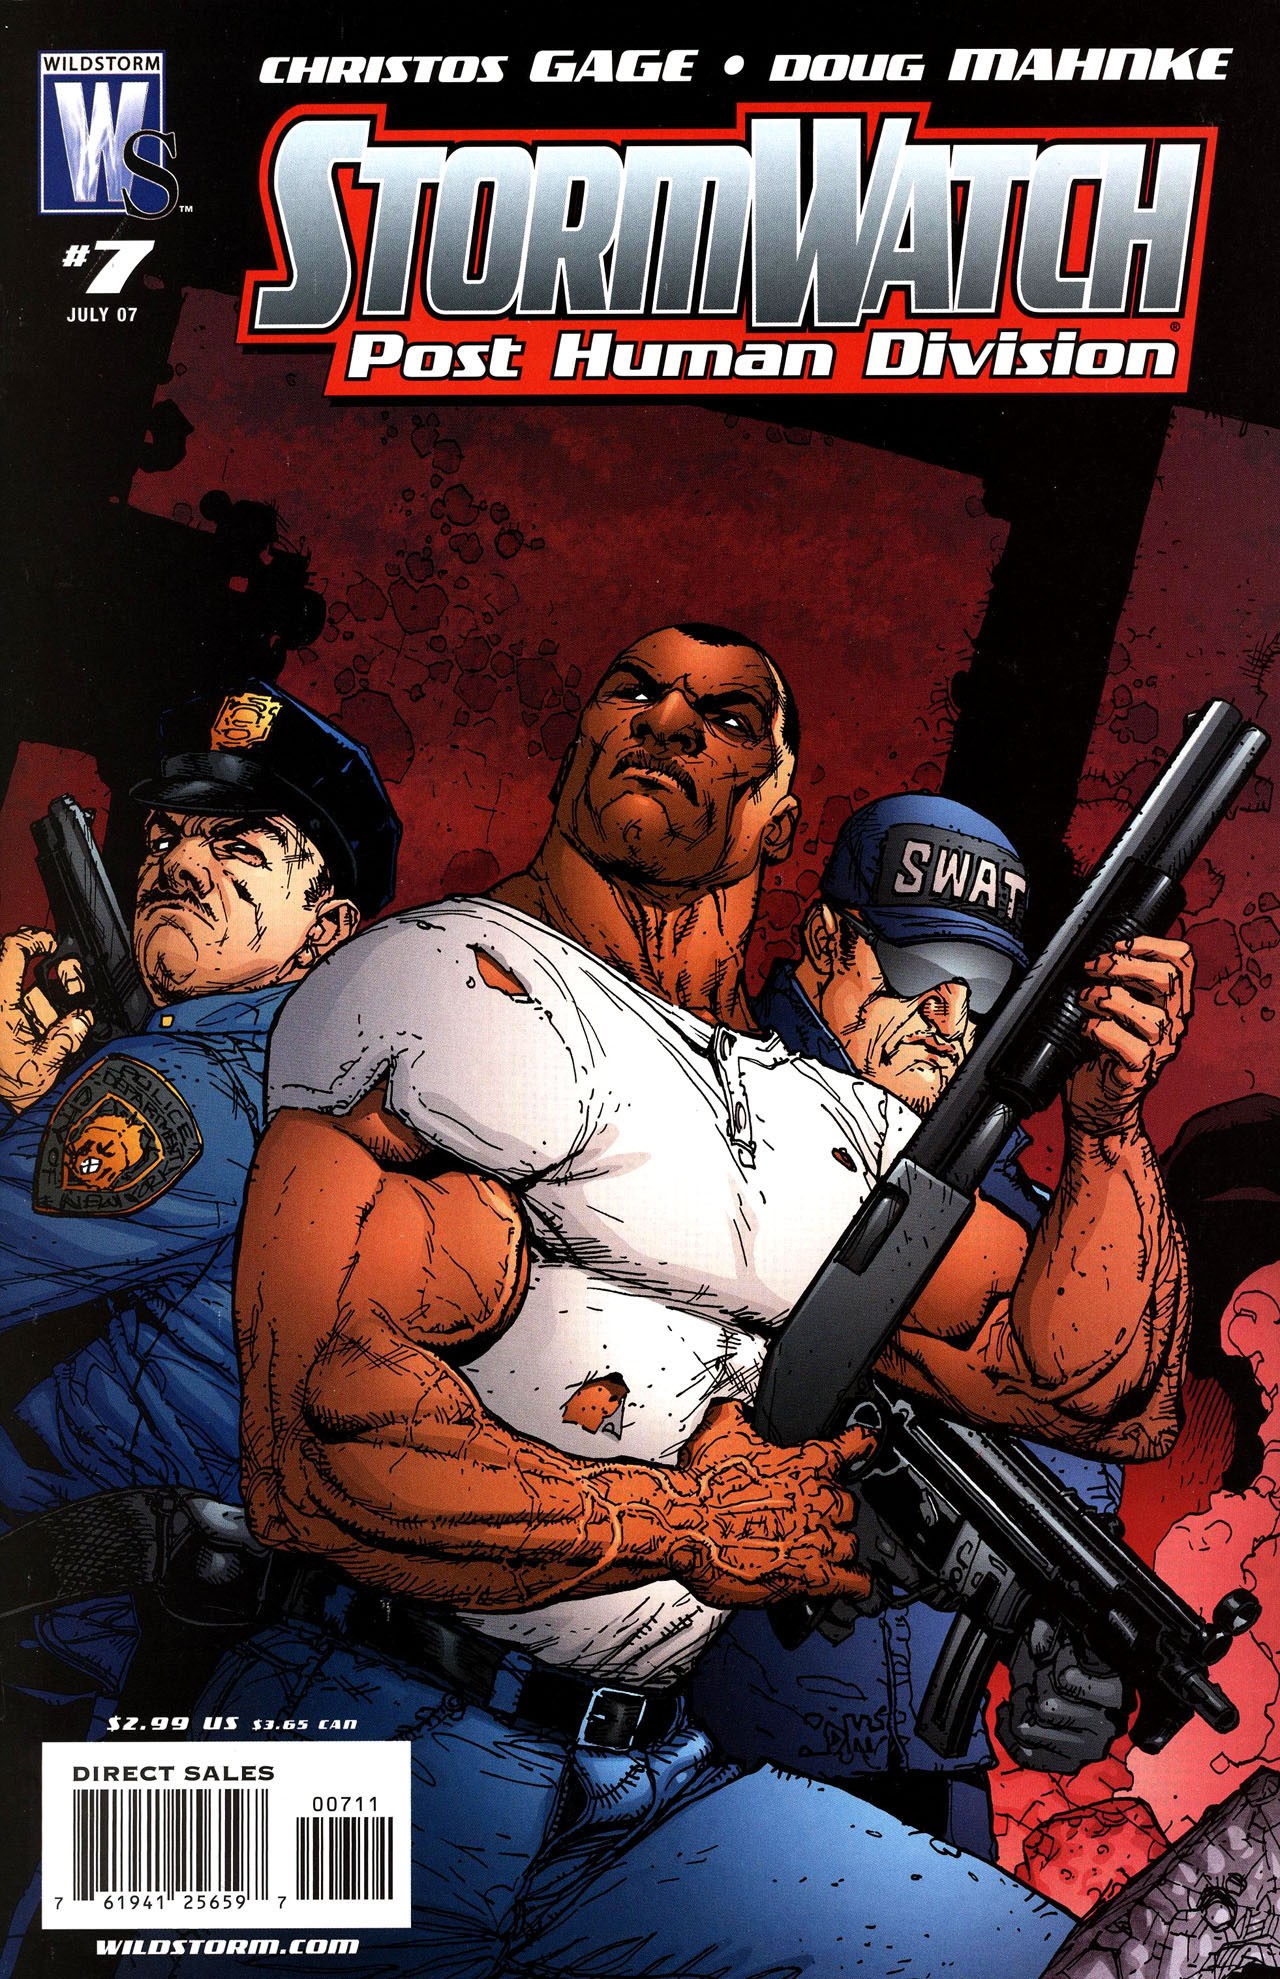 Stormwatch: Post Human Division Vol. 1 #7